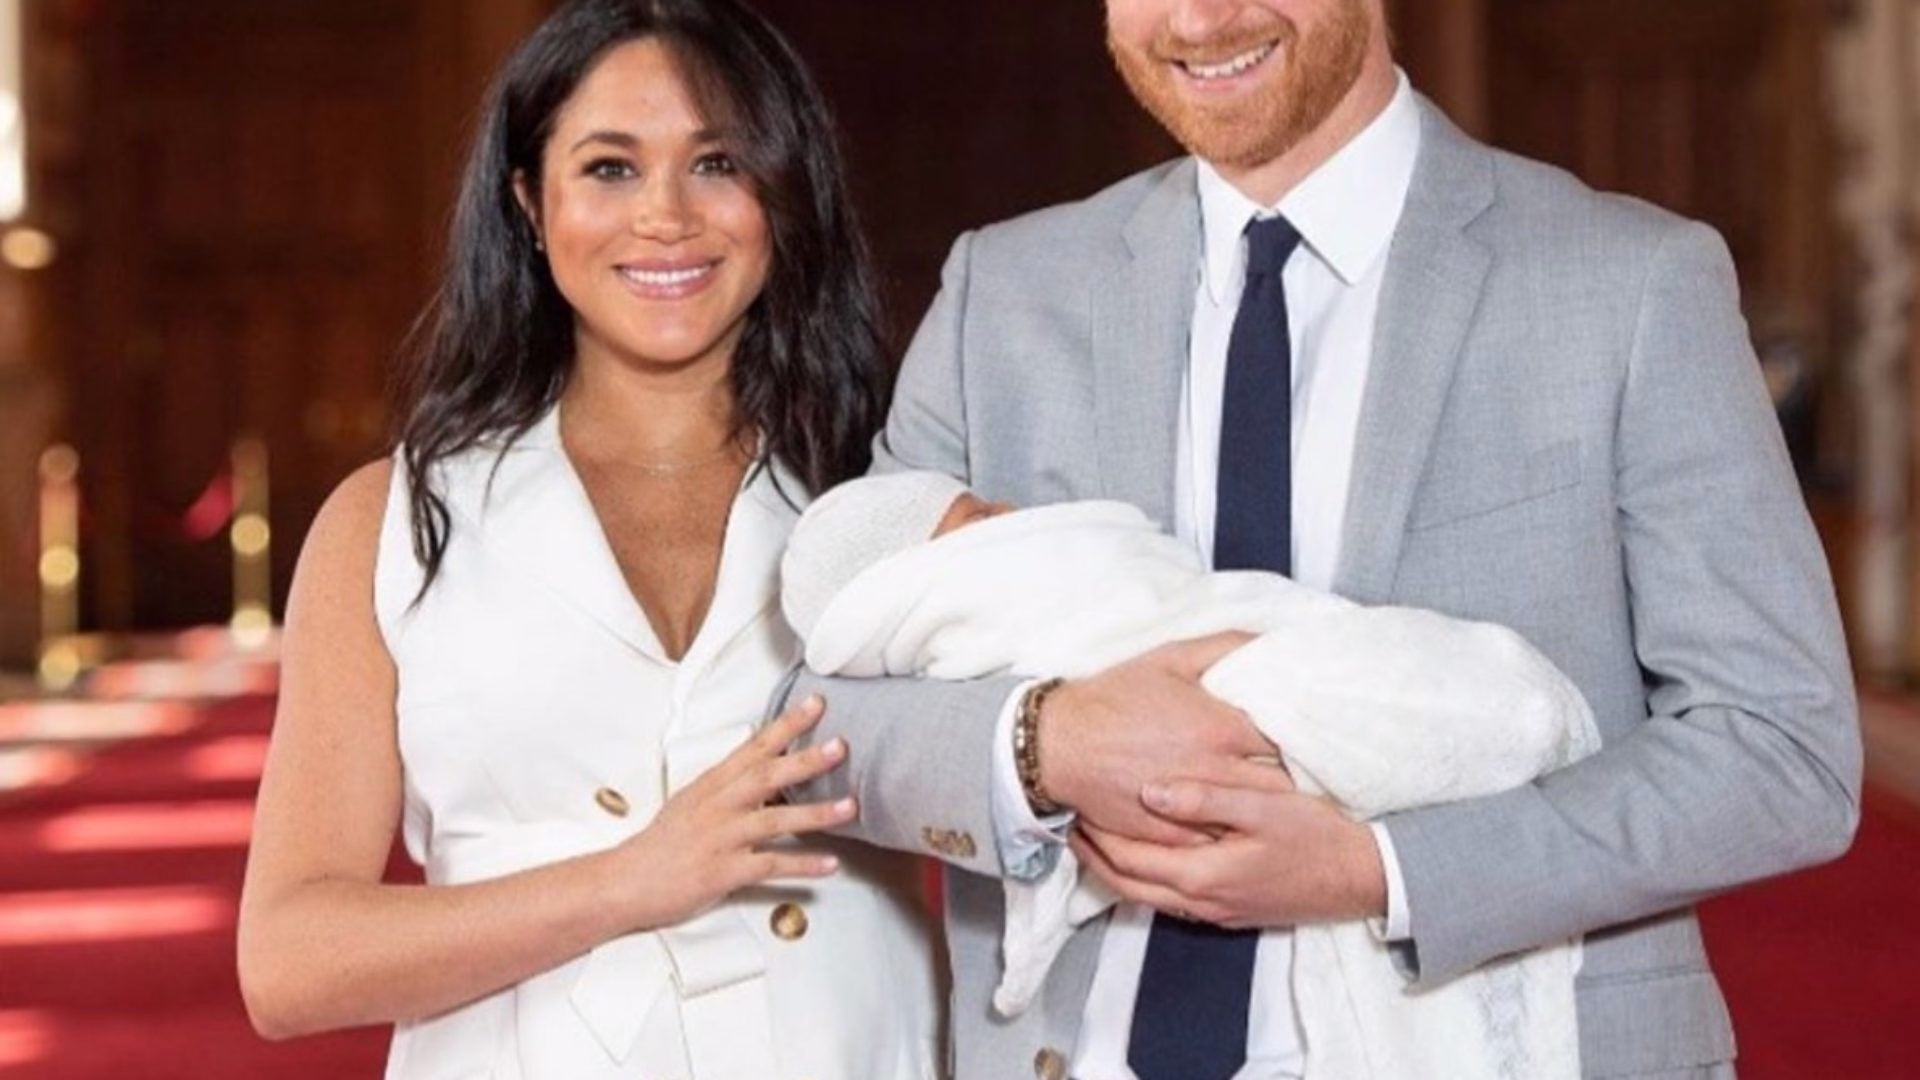 9 Glossy Beauty Products You Need To Get Meghan Markle's Post-Baby Glow